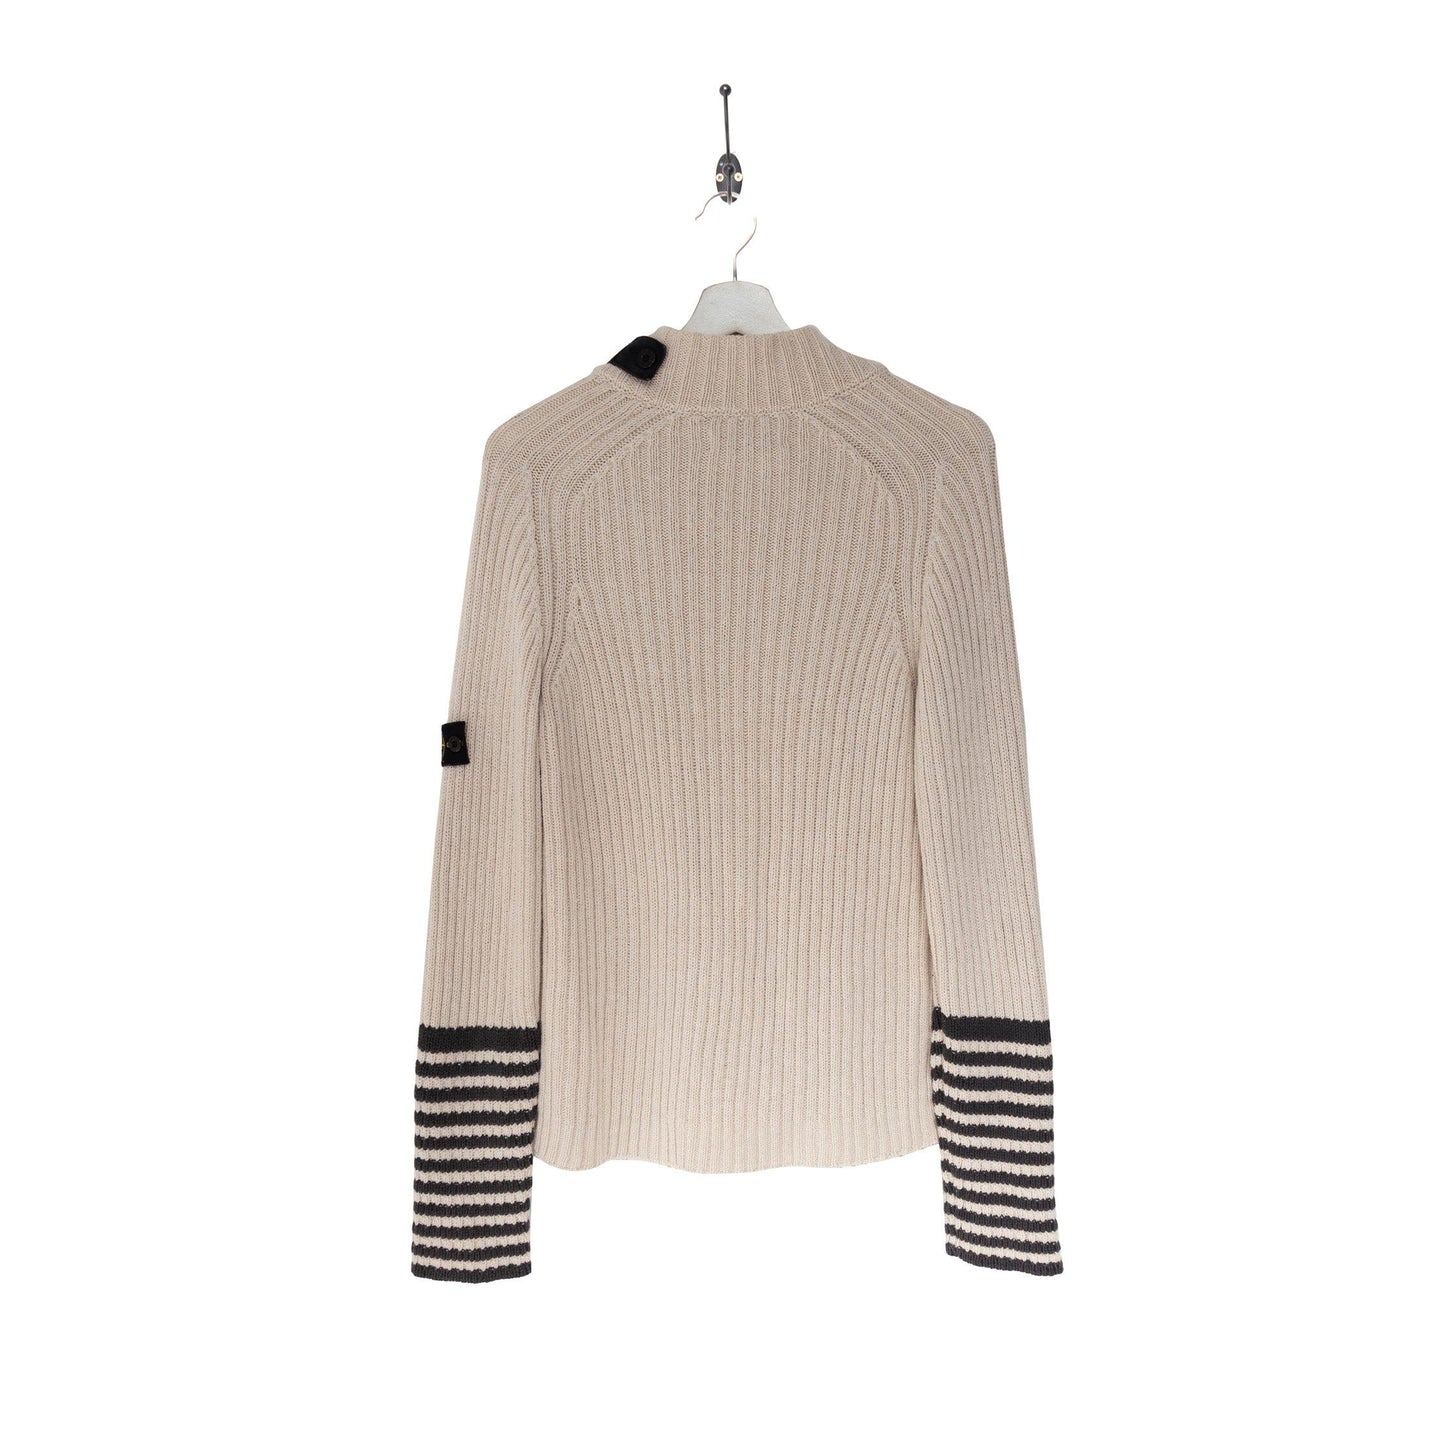 Stone Island Spring/Summer 2006 Striped Knit Sweater - Known Source